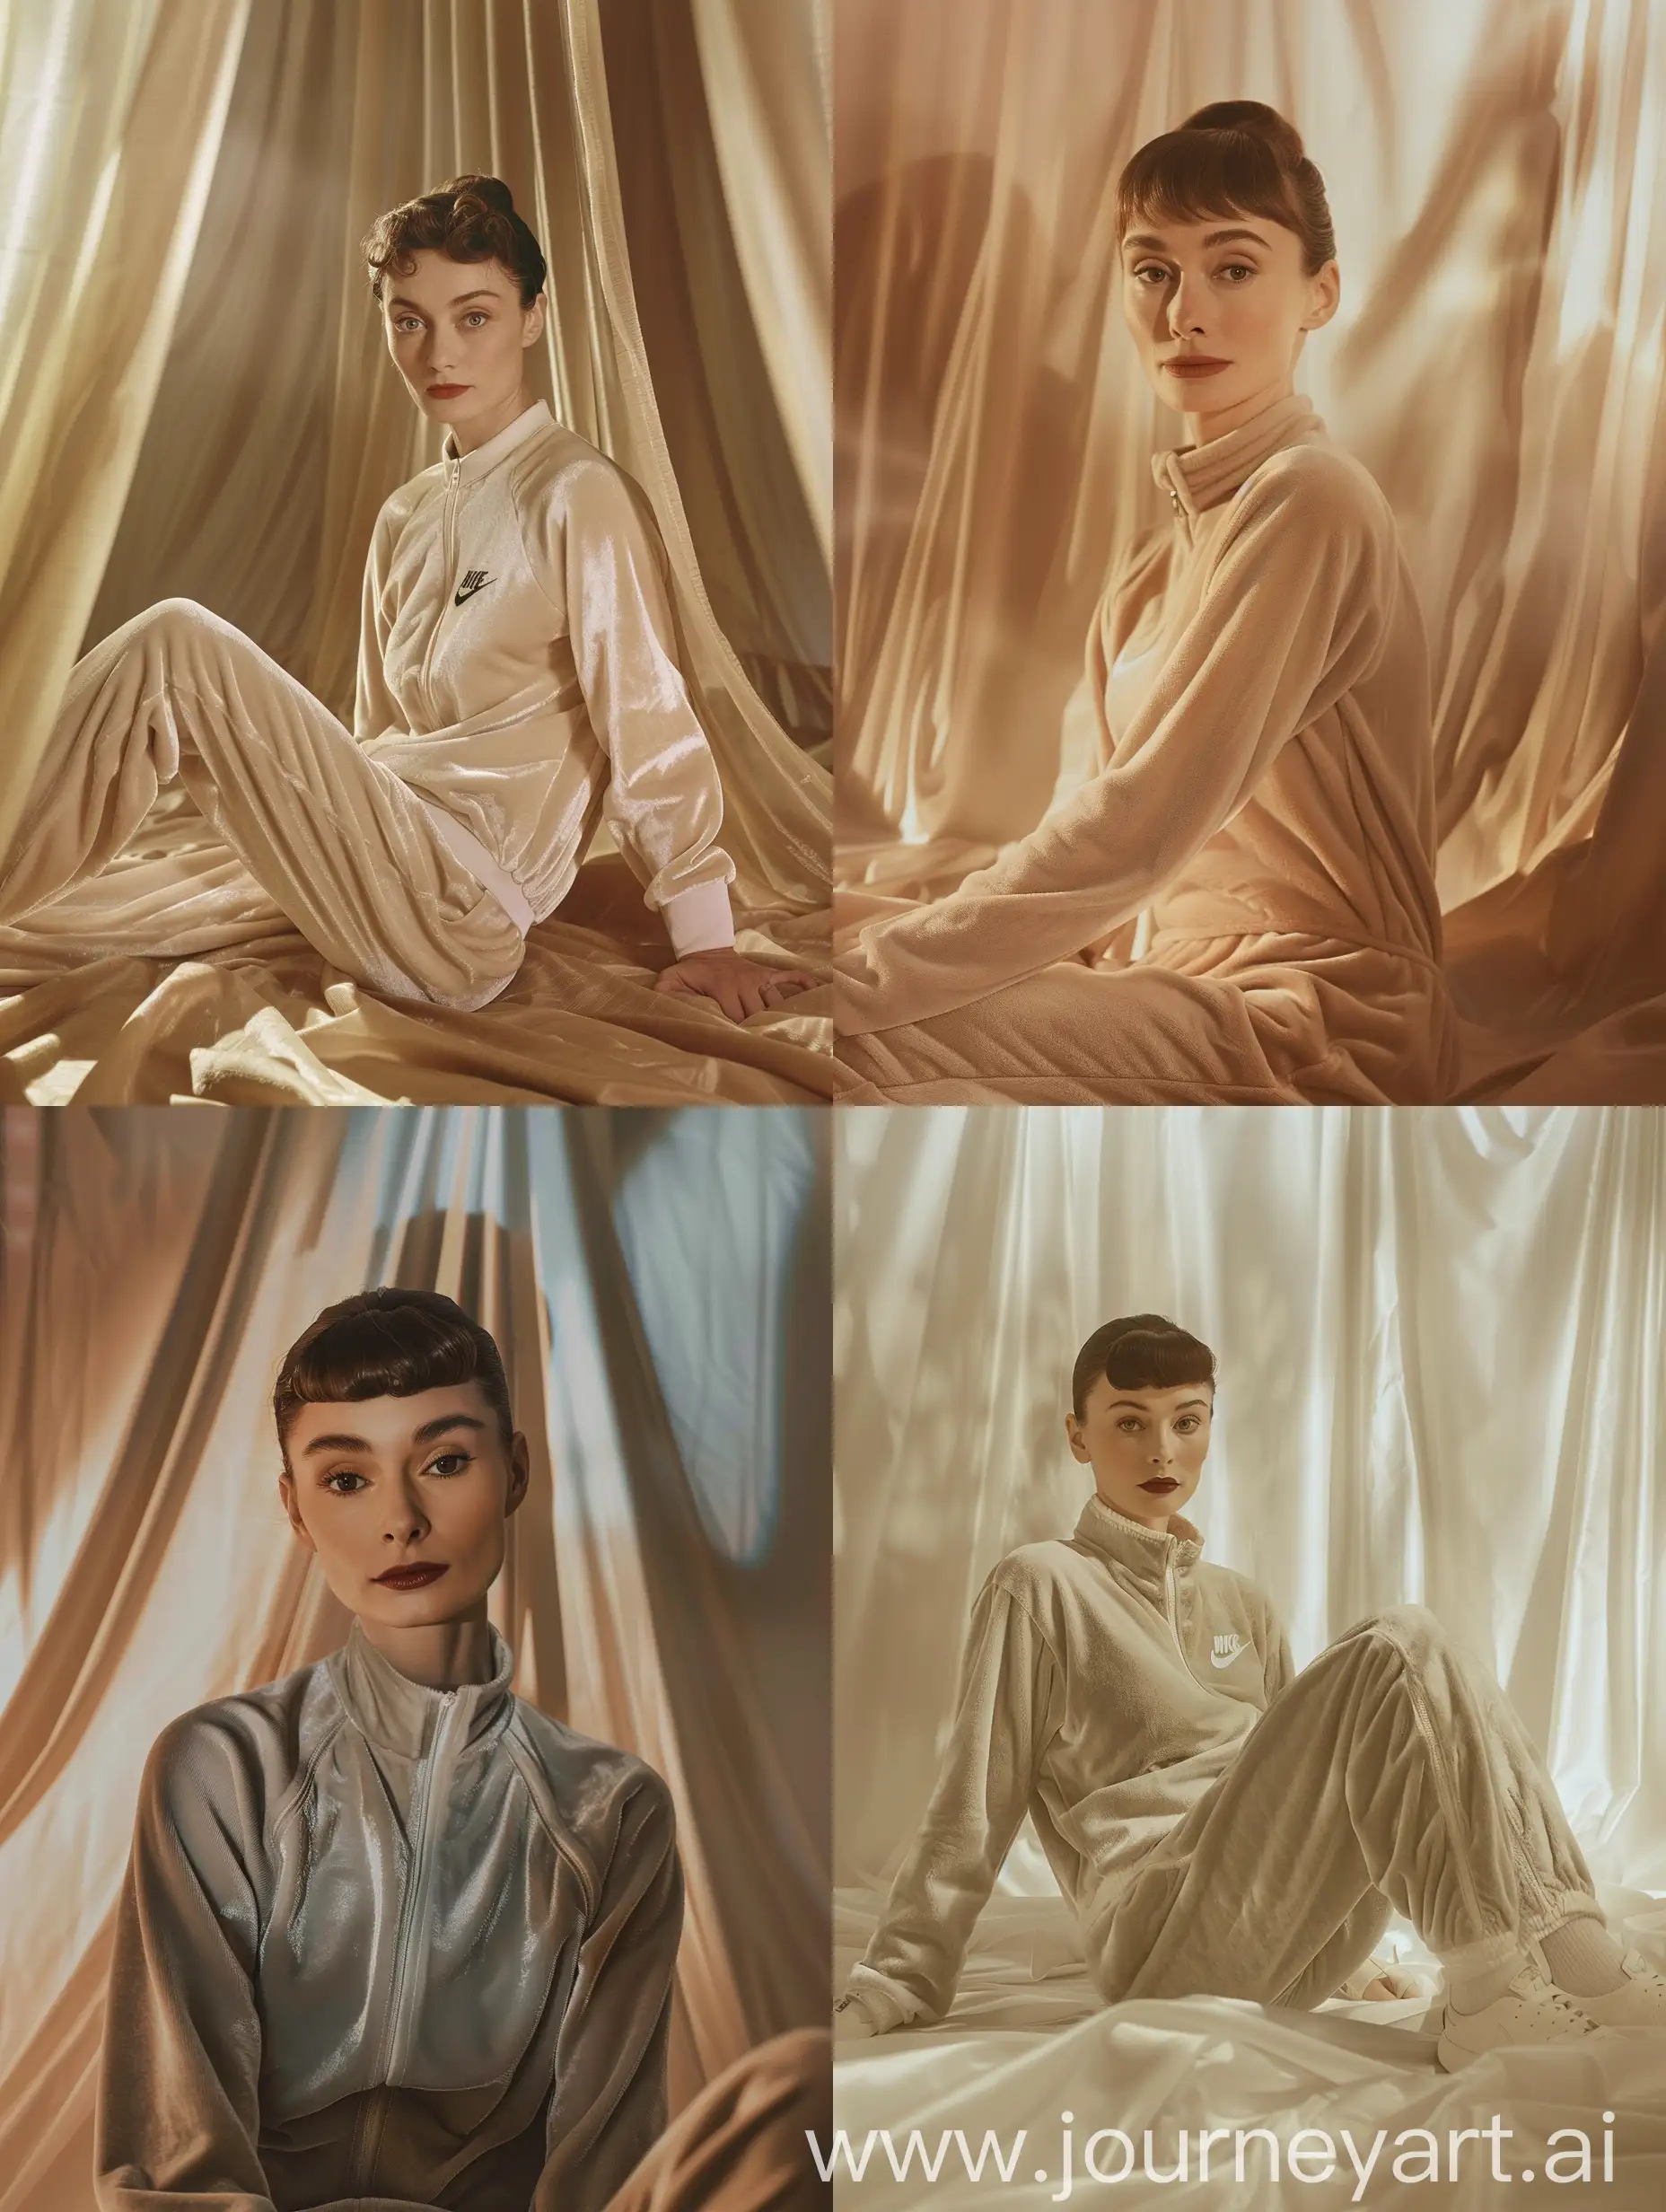 Audrey Hepburn exudes timeless elegance in a tailored Nike track suit, crafted from plush velour fabric, seated within an indoor fashion editorial. Soft, diffused lighting gently illuminates the scene, enhancing the texture of the luxurious fabric and accentuating her poised demeanor. The minimalist studio setting, with clean lines and neutral tones, provides a sophisticated backdrop, perfectly complementing Hepburn's effortless grace. This homage celebrates her enduring legacy as a symbol of sophistication and style.